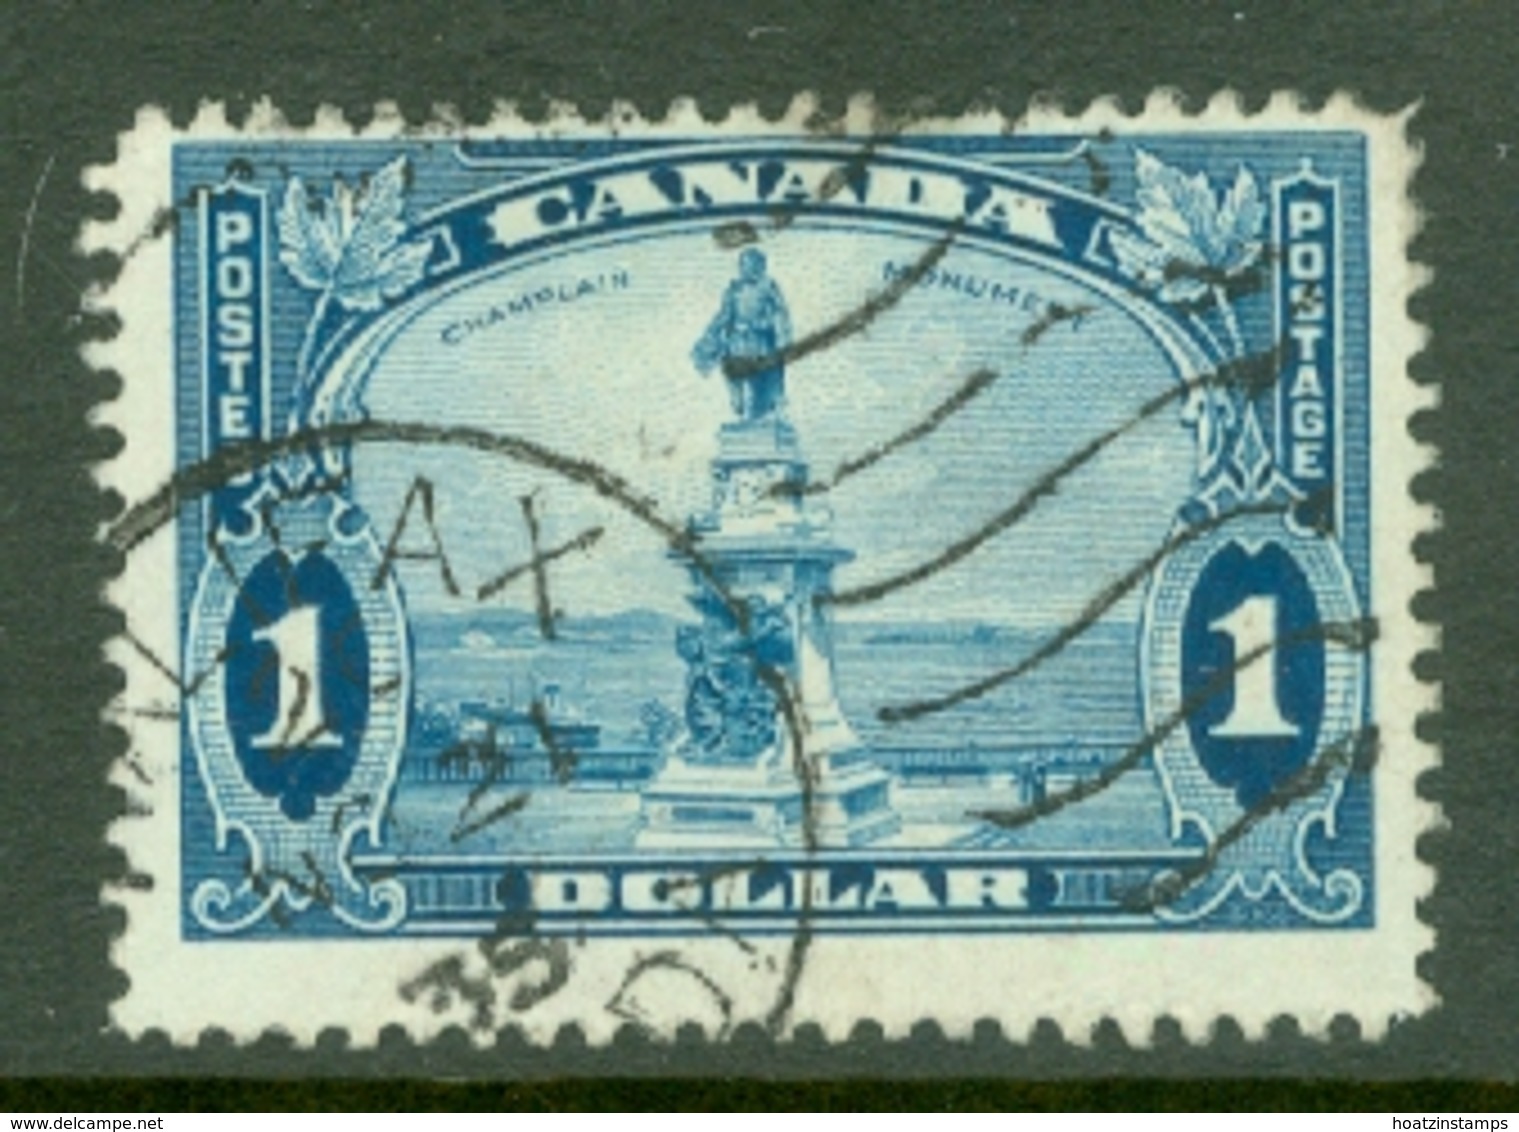 Canada: 1935   KGV - Pictorial   SG351    $1     Used - Used Stamps